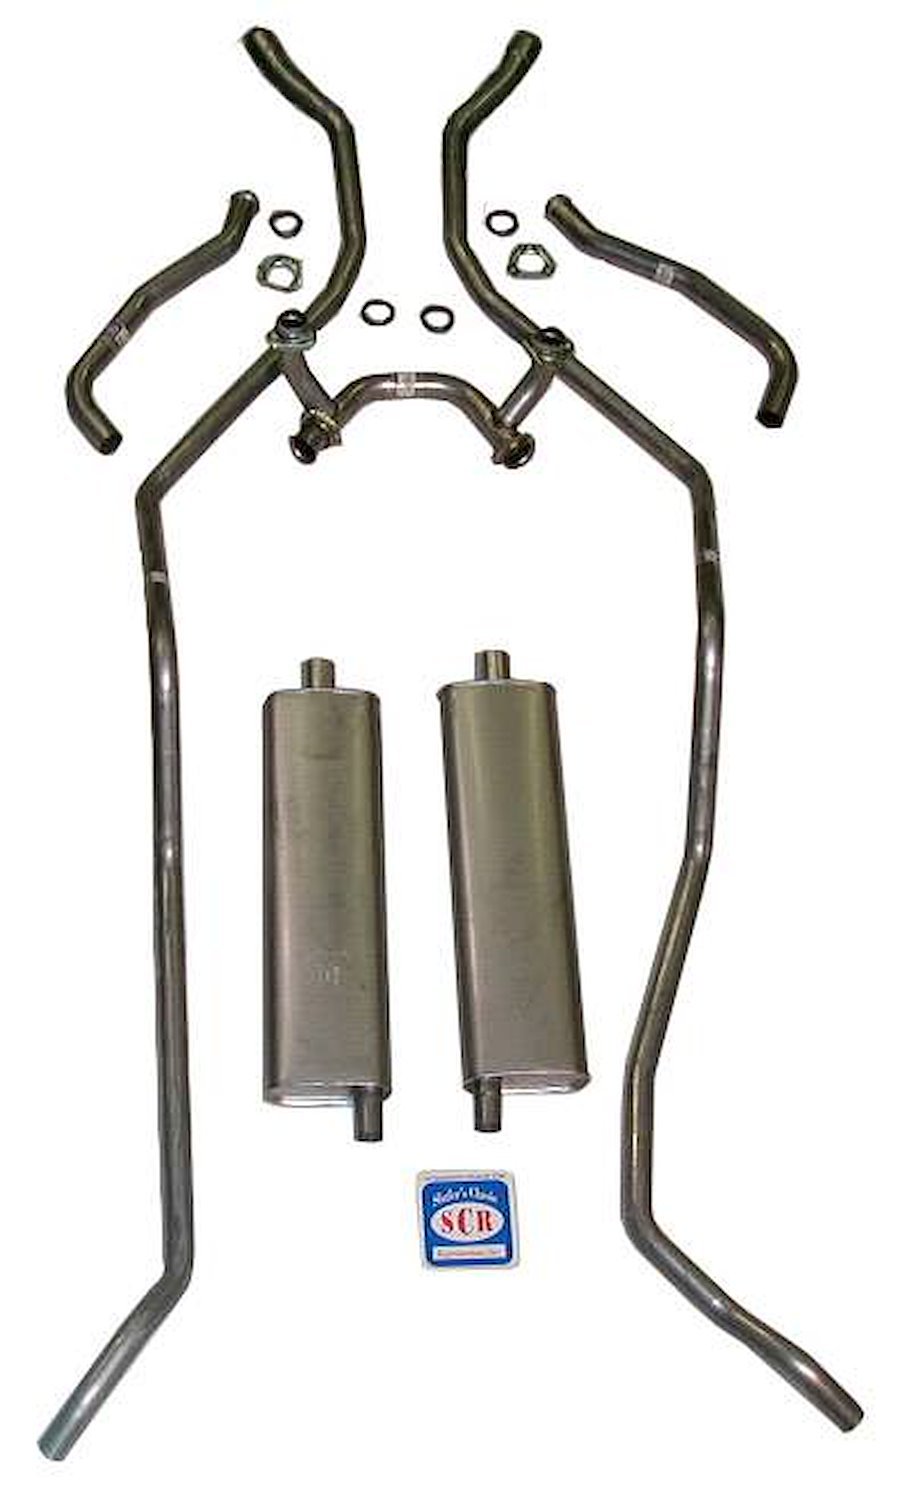 73007 1958 Chevrolet Full-Size Exhaust System 8-cyl 283 Dual